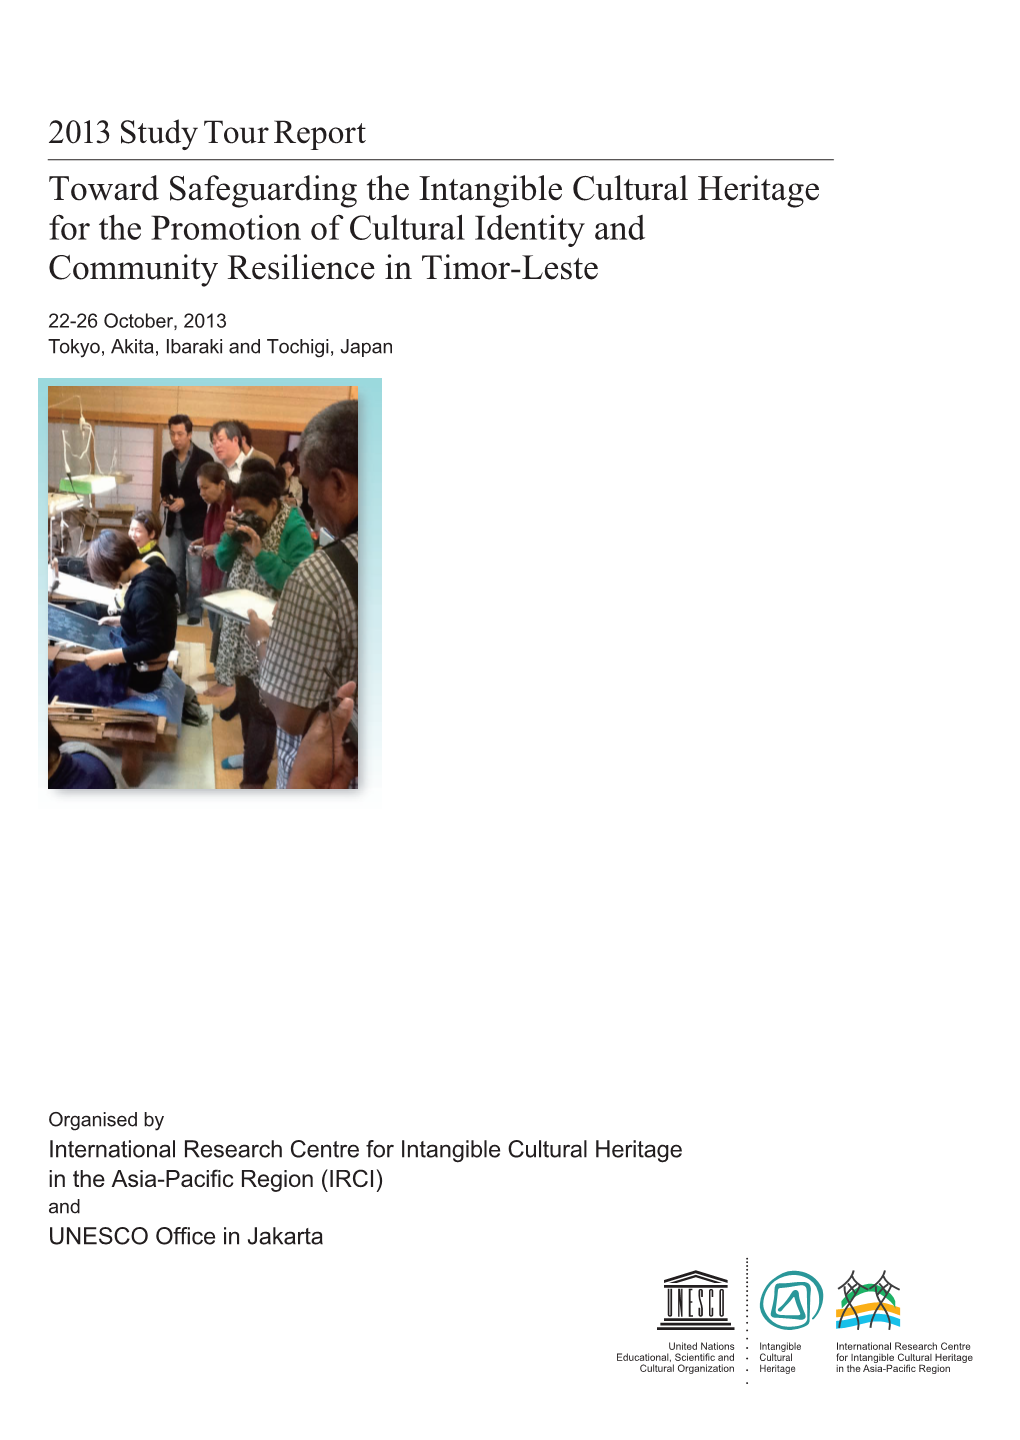 Toward Safeguarding the Intangible Cultural Heritage for the Promotion of Cultural Identity and Community Resilience in Timor-Leste